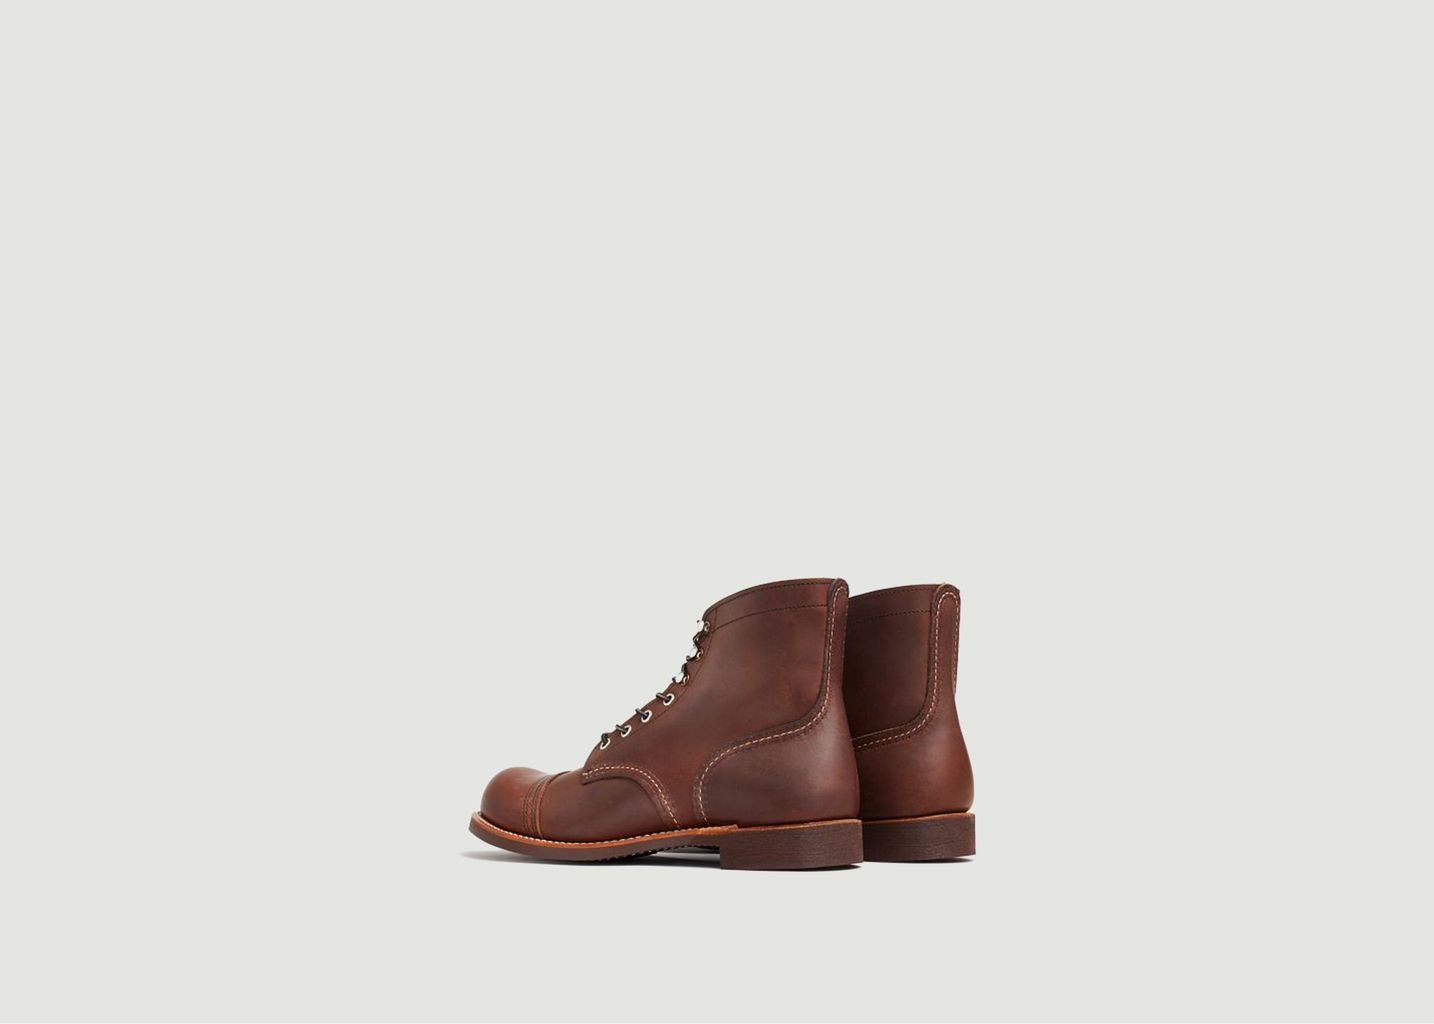 Boots Ranger Iron  - Red Wing Shoes